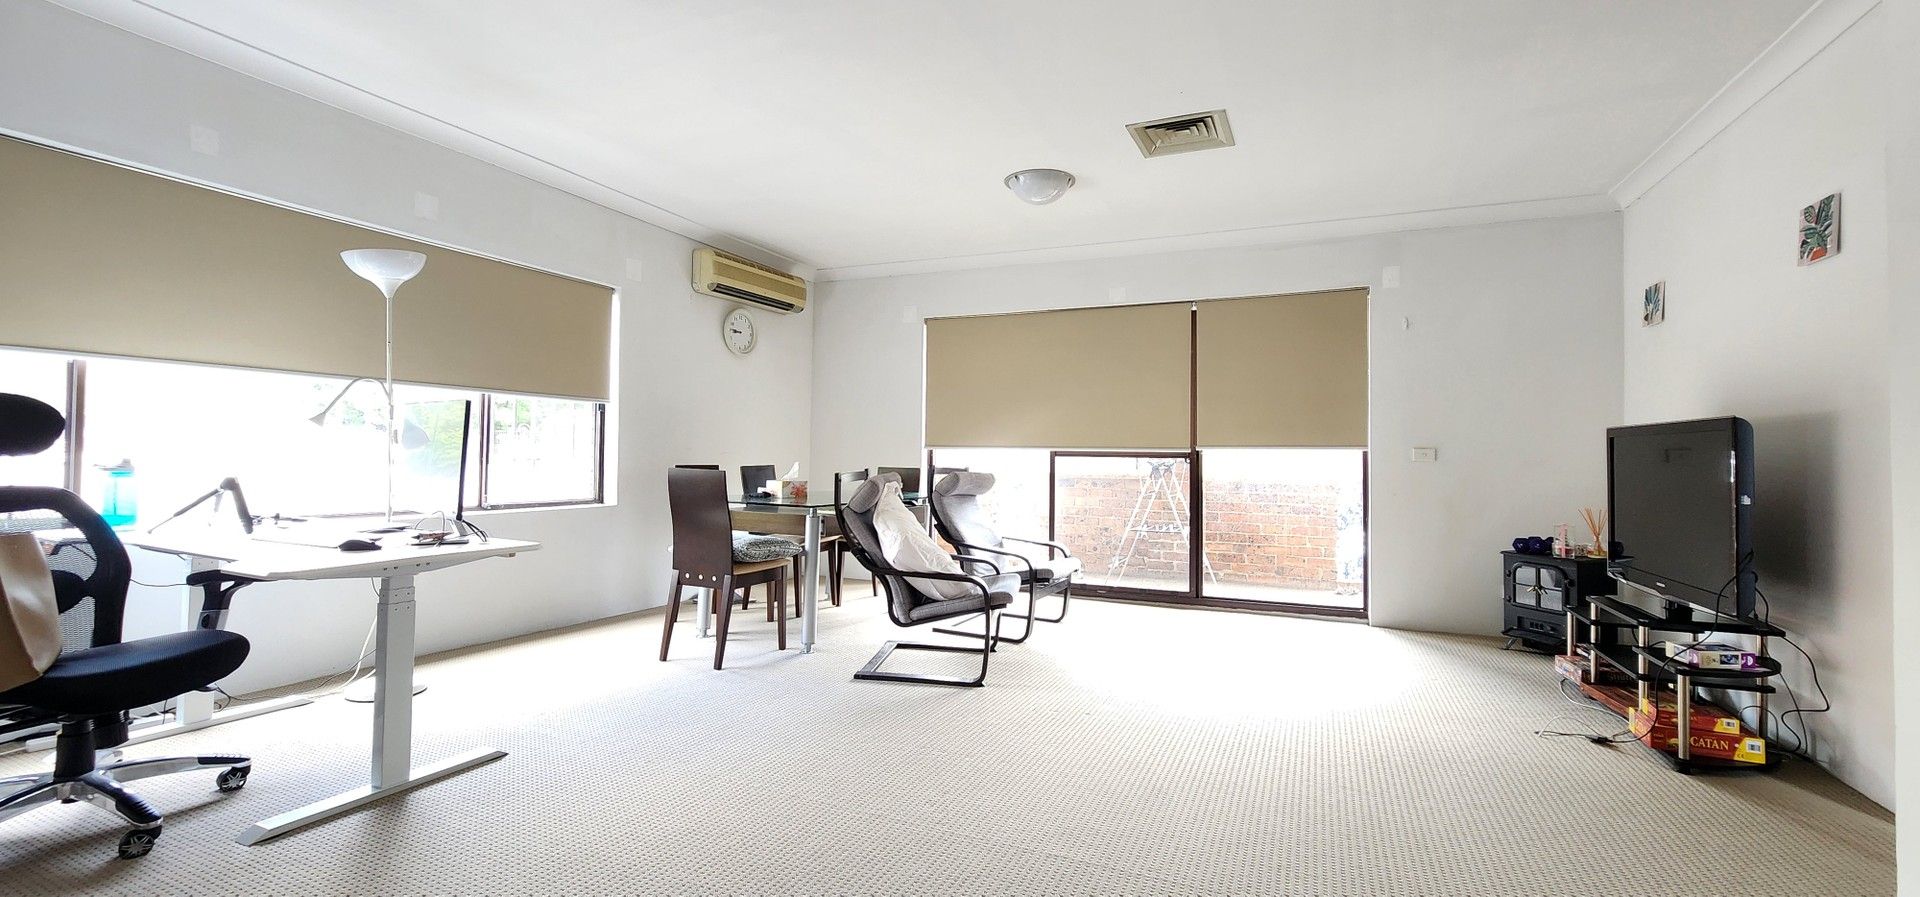 2 bedrooms Apartment / Unit / Flat in 4/1020 Victoria Road WEST RYDE NSW, 2114